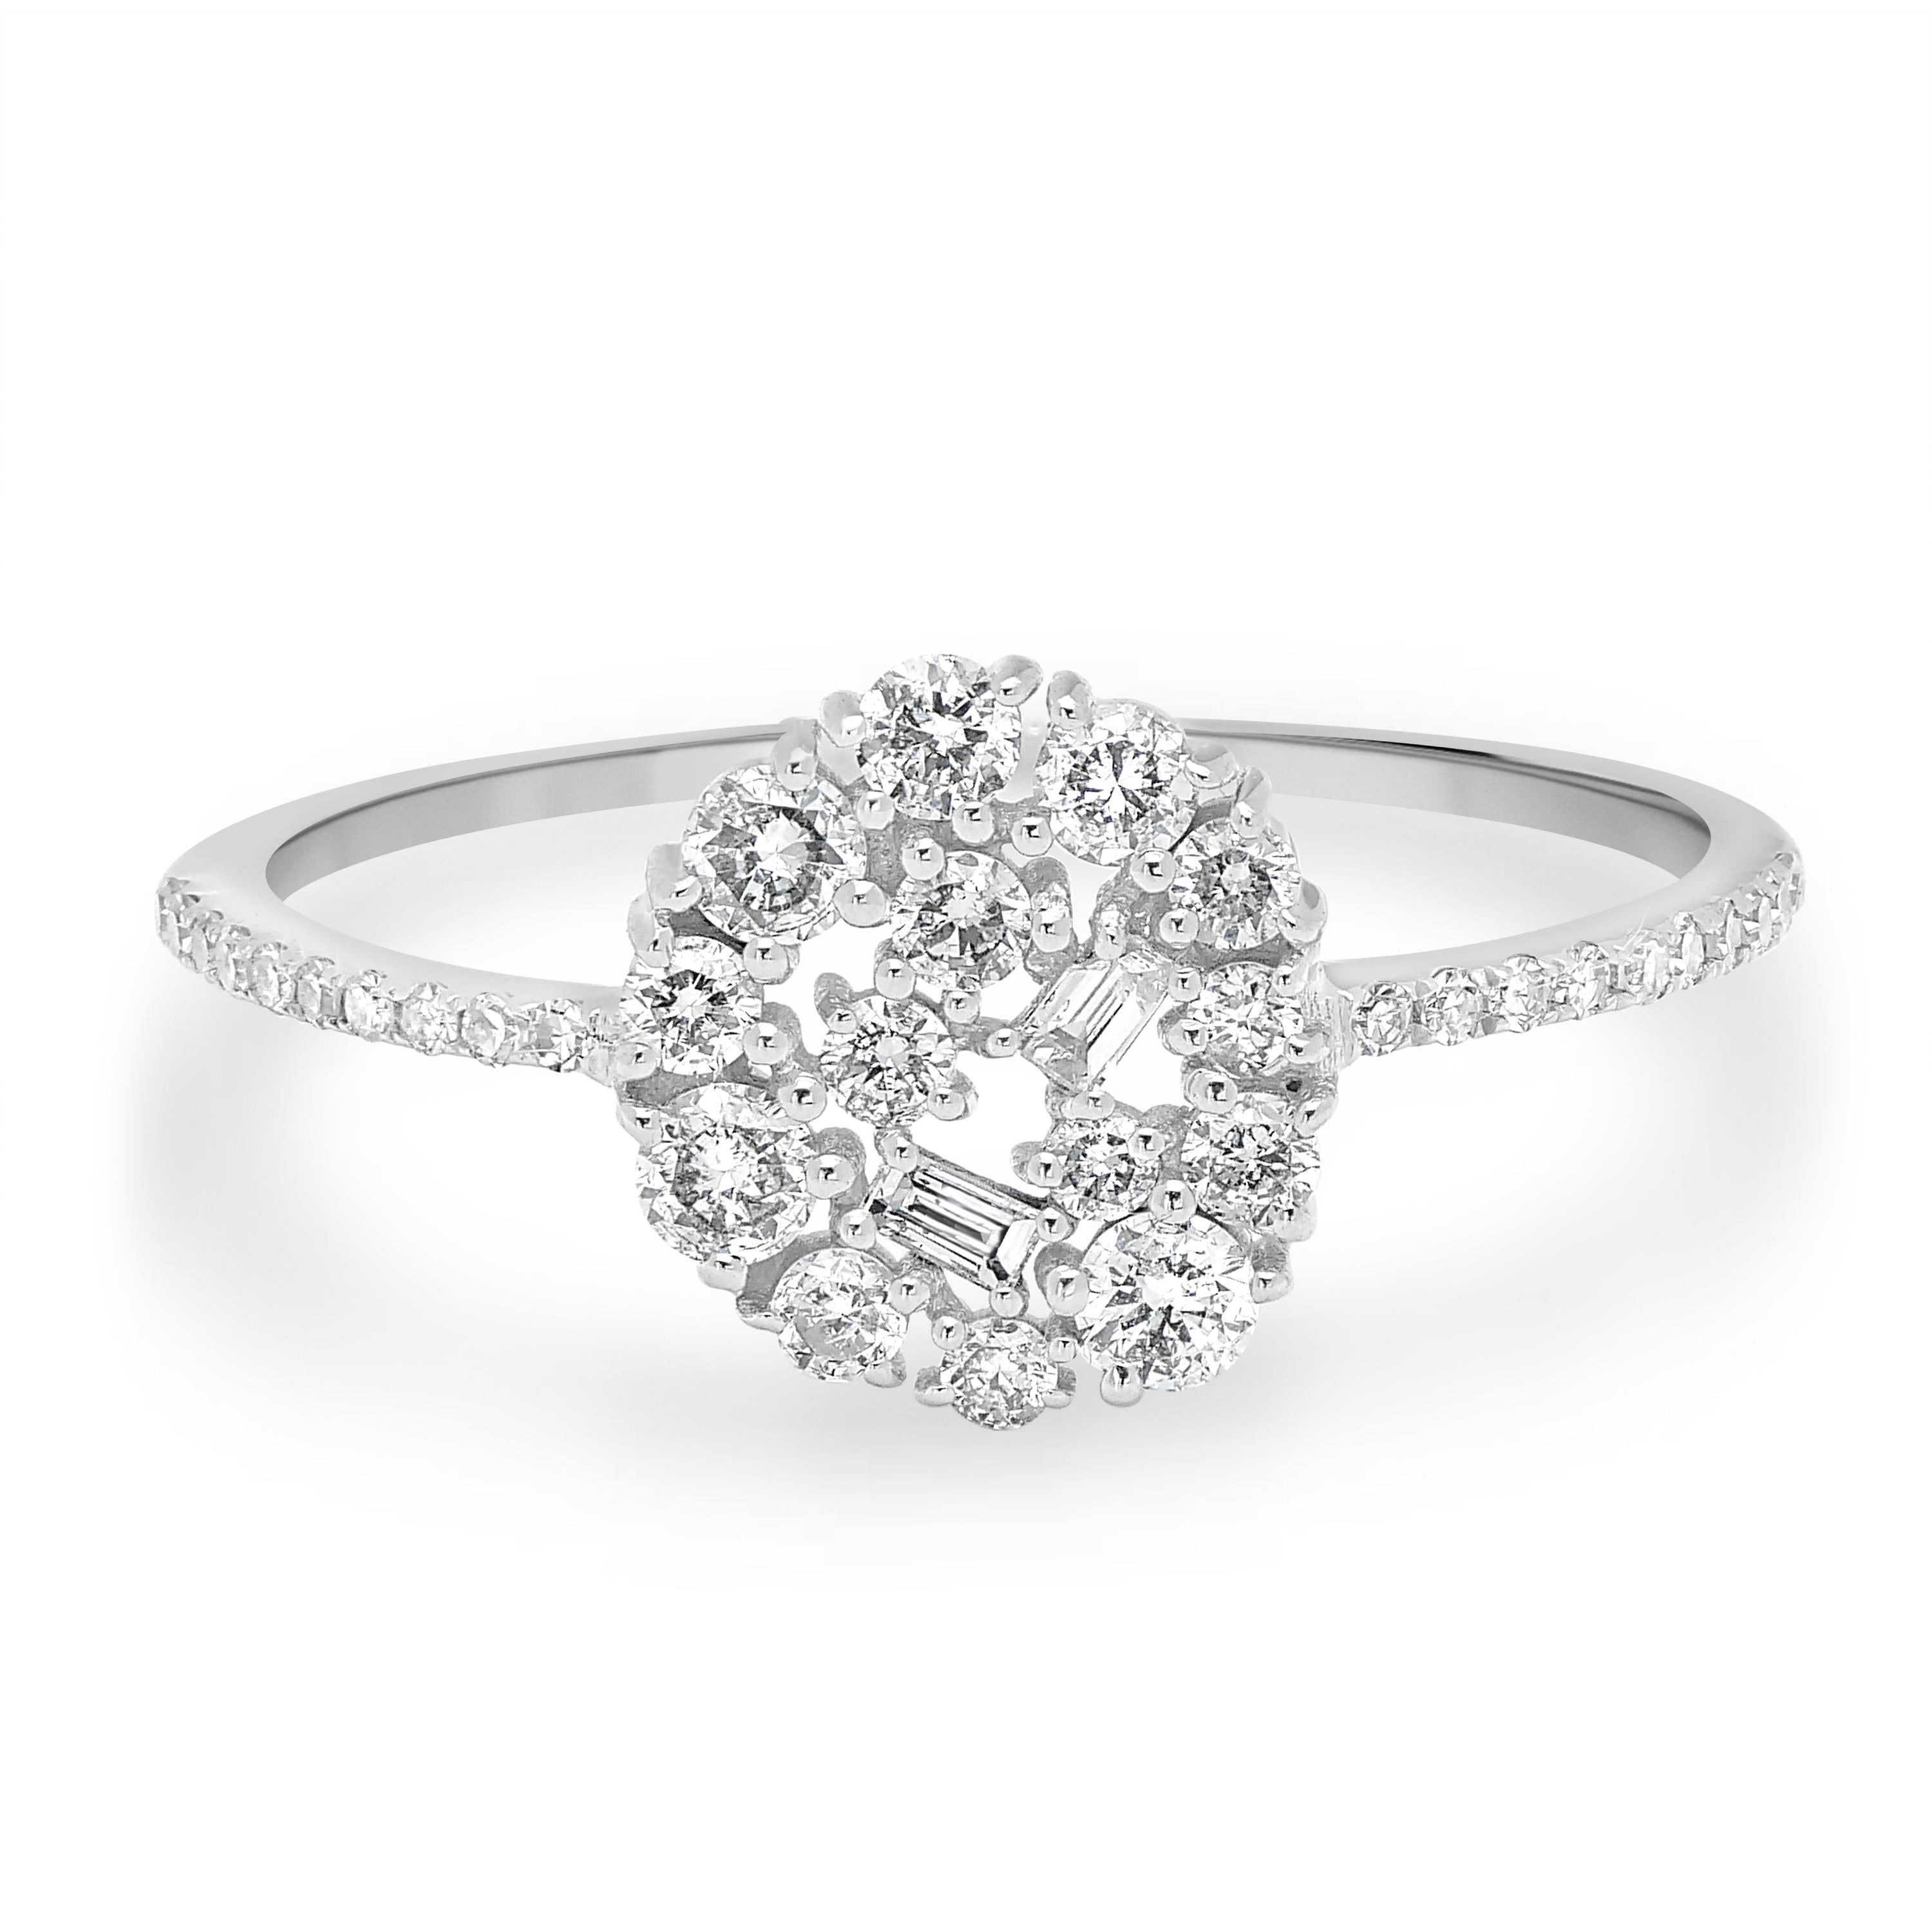 For Sale:  Luxle 3/8 Carat T.W. Diamond Cluster Ring in 14k White Gold 6